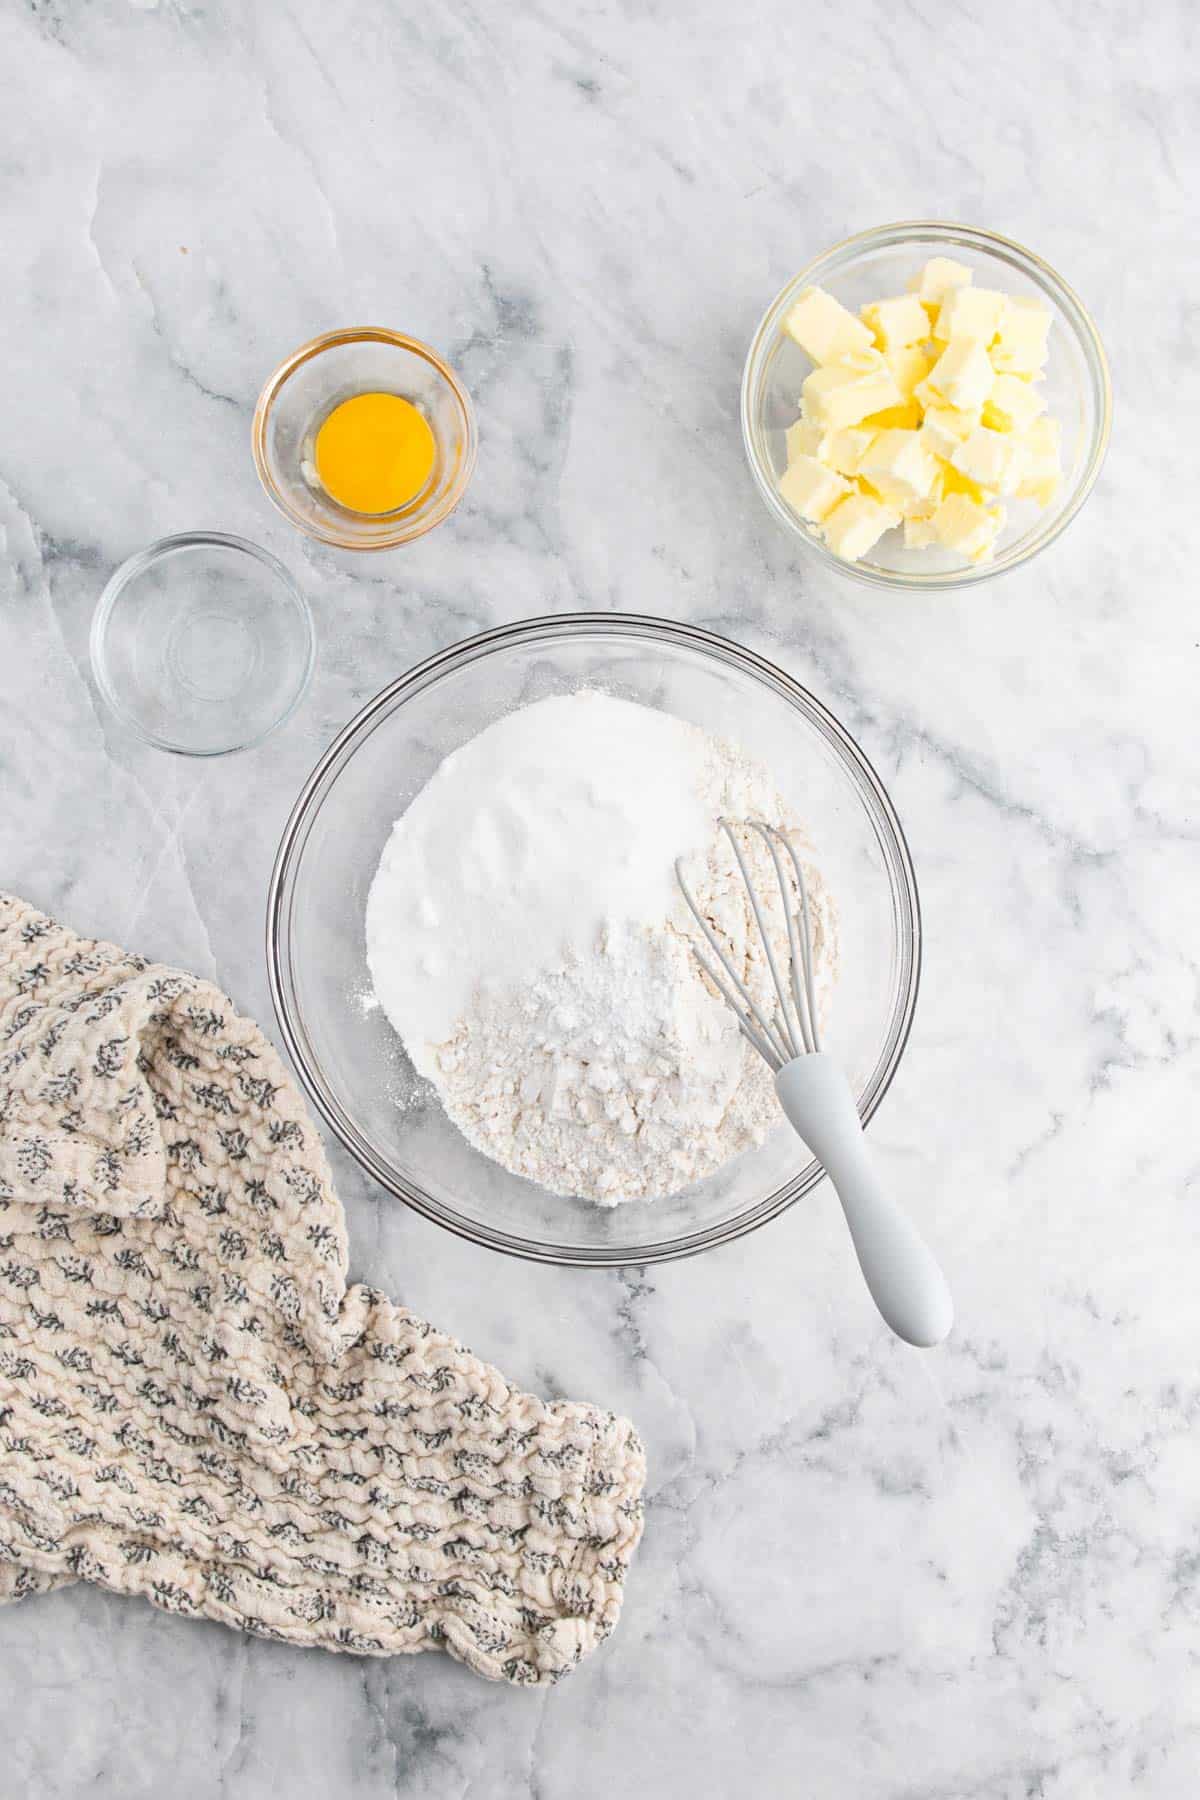 Flour, baking powder, salt, and sugar in a bowl with a whisk.